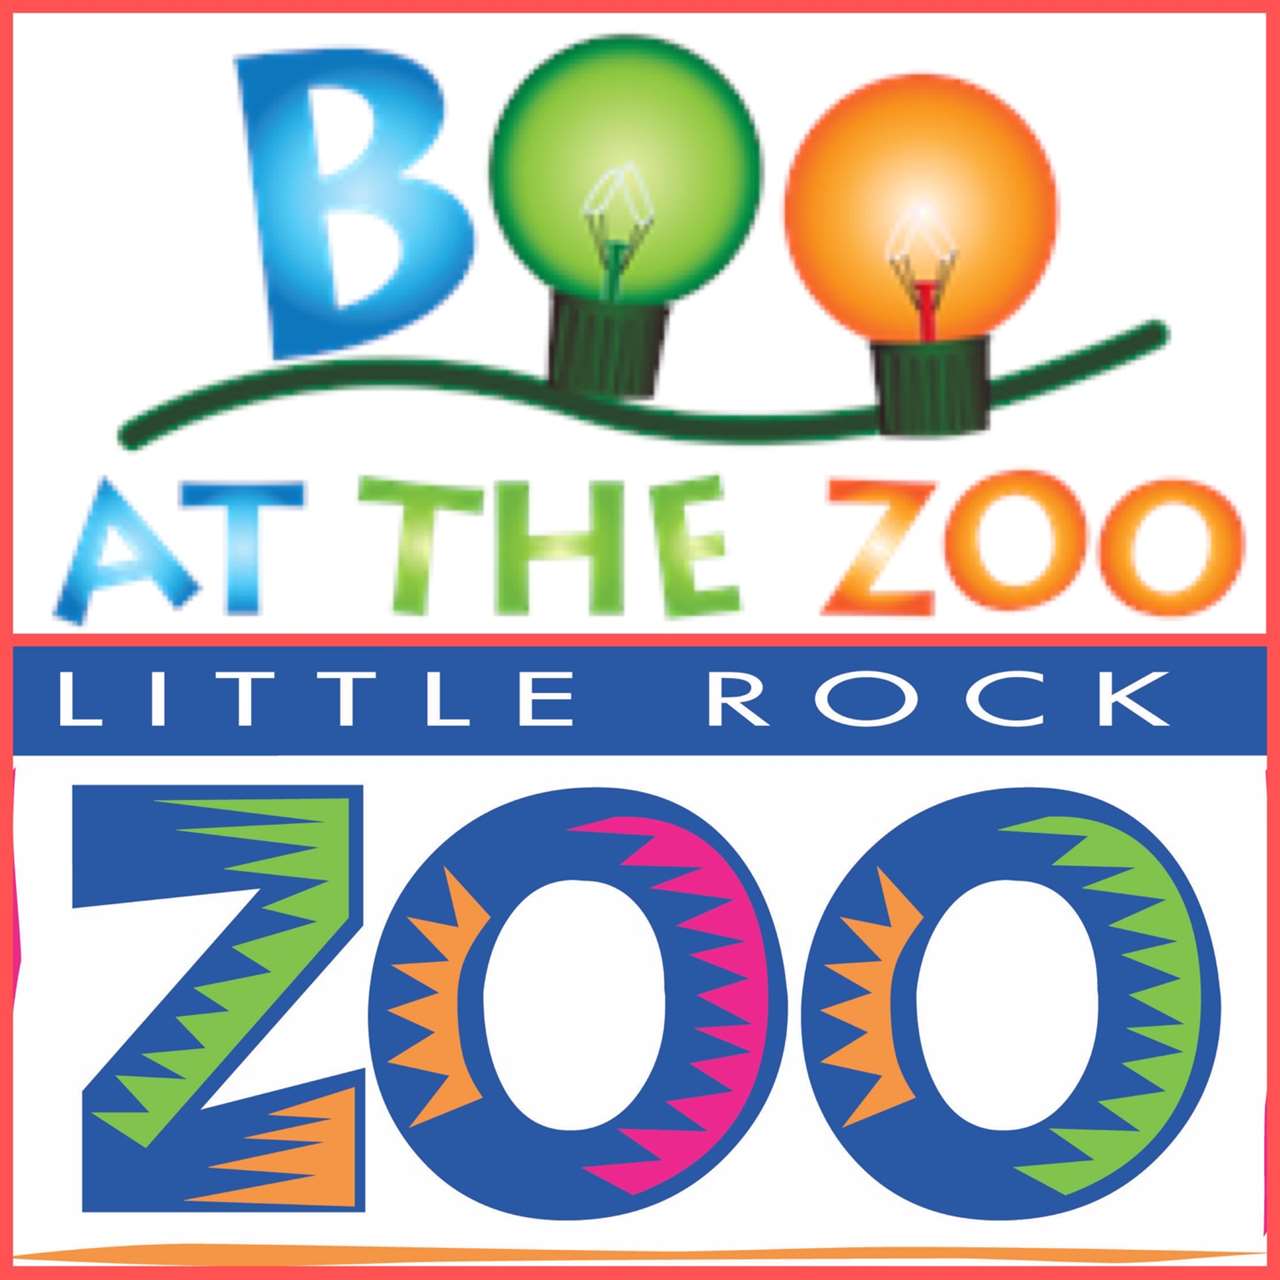 Boo at The Zoo LR Sun, Oct 22 6PM at Little Rock Zoo